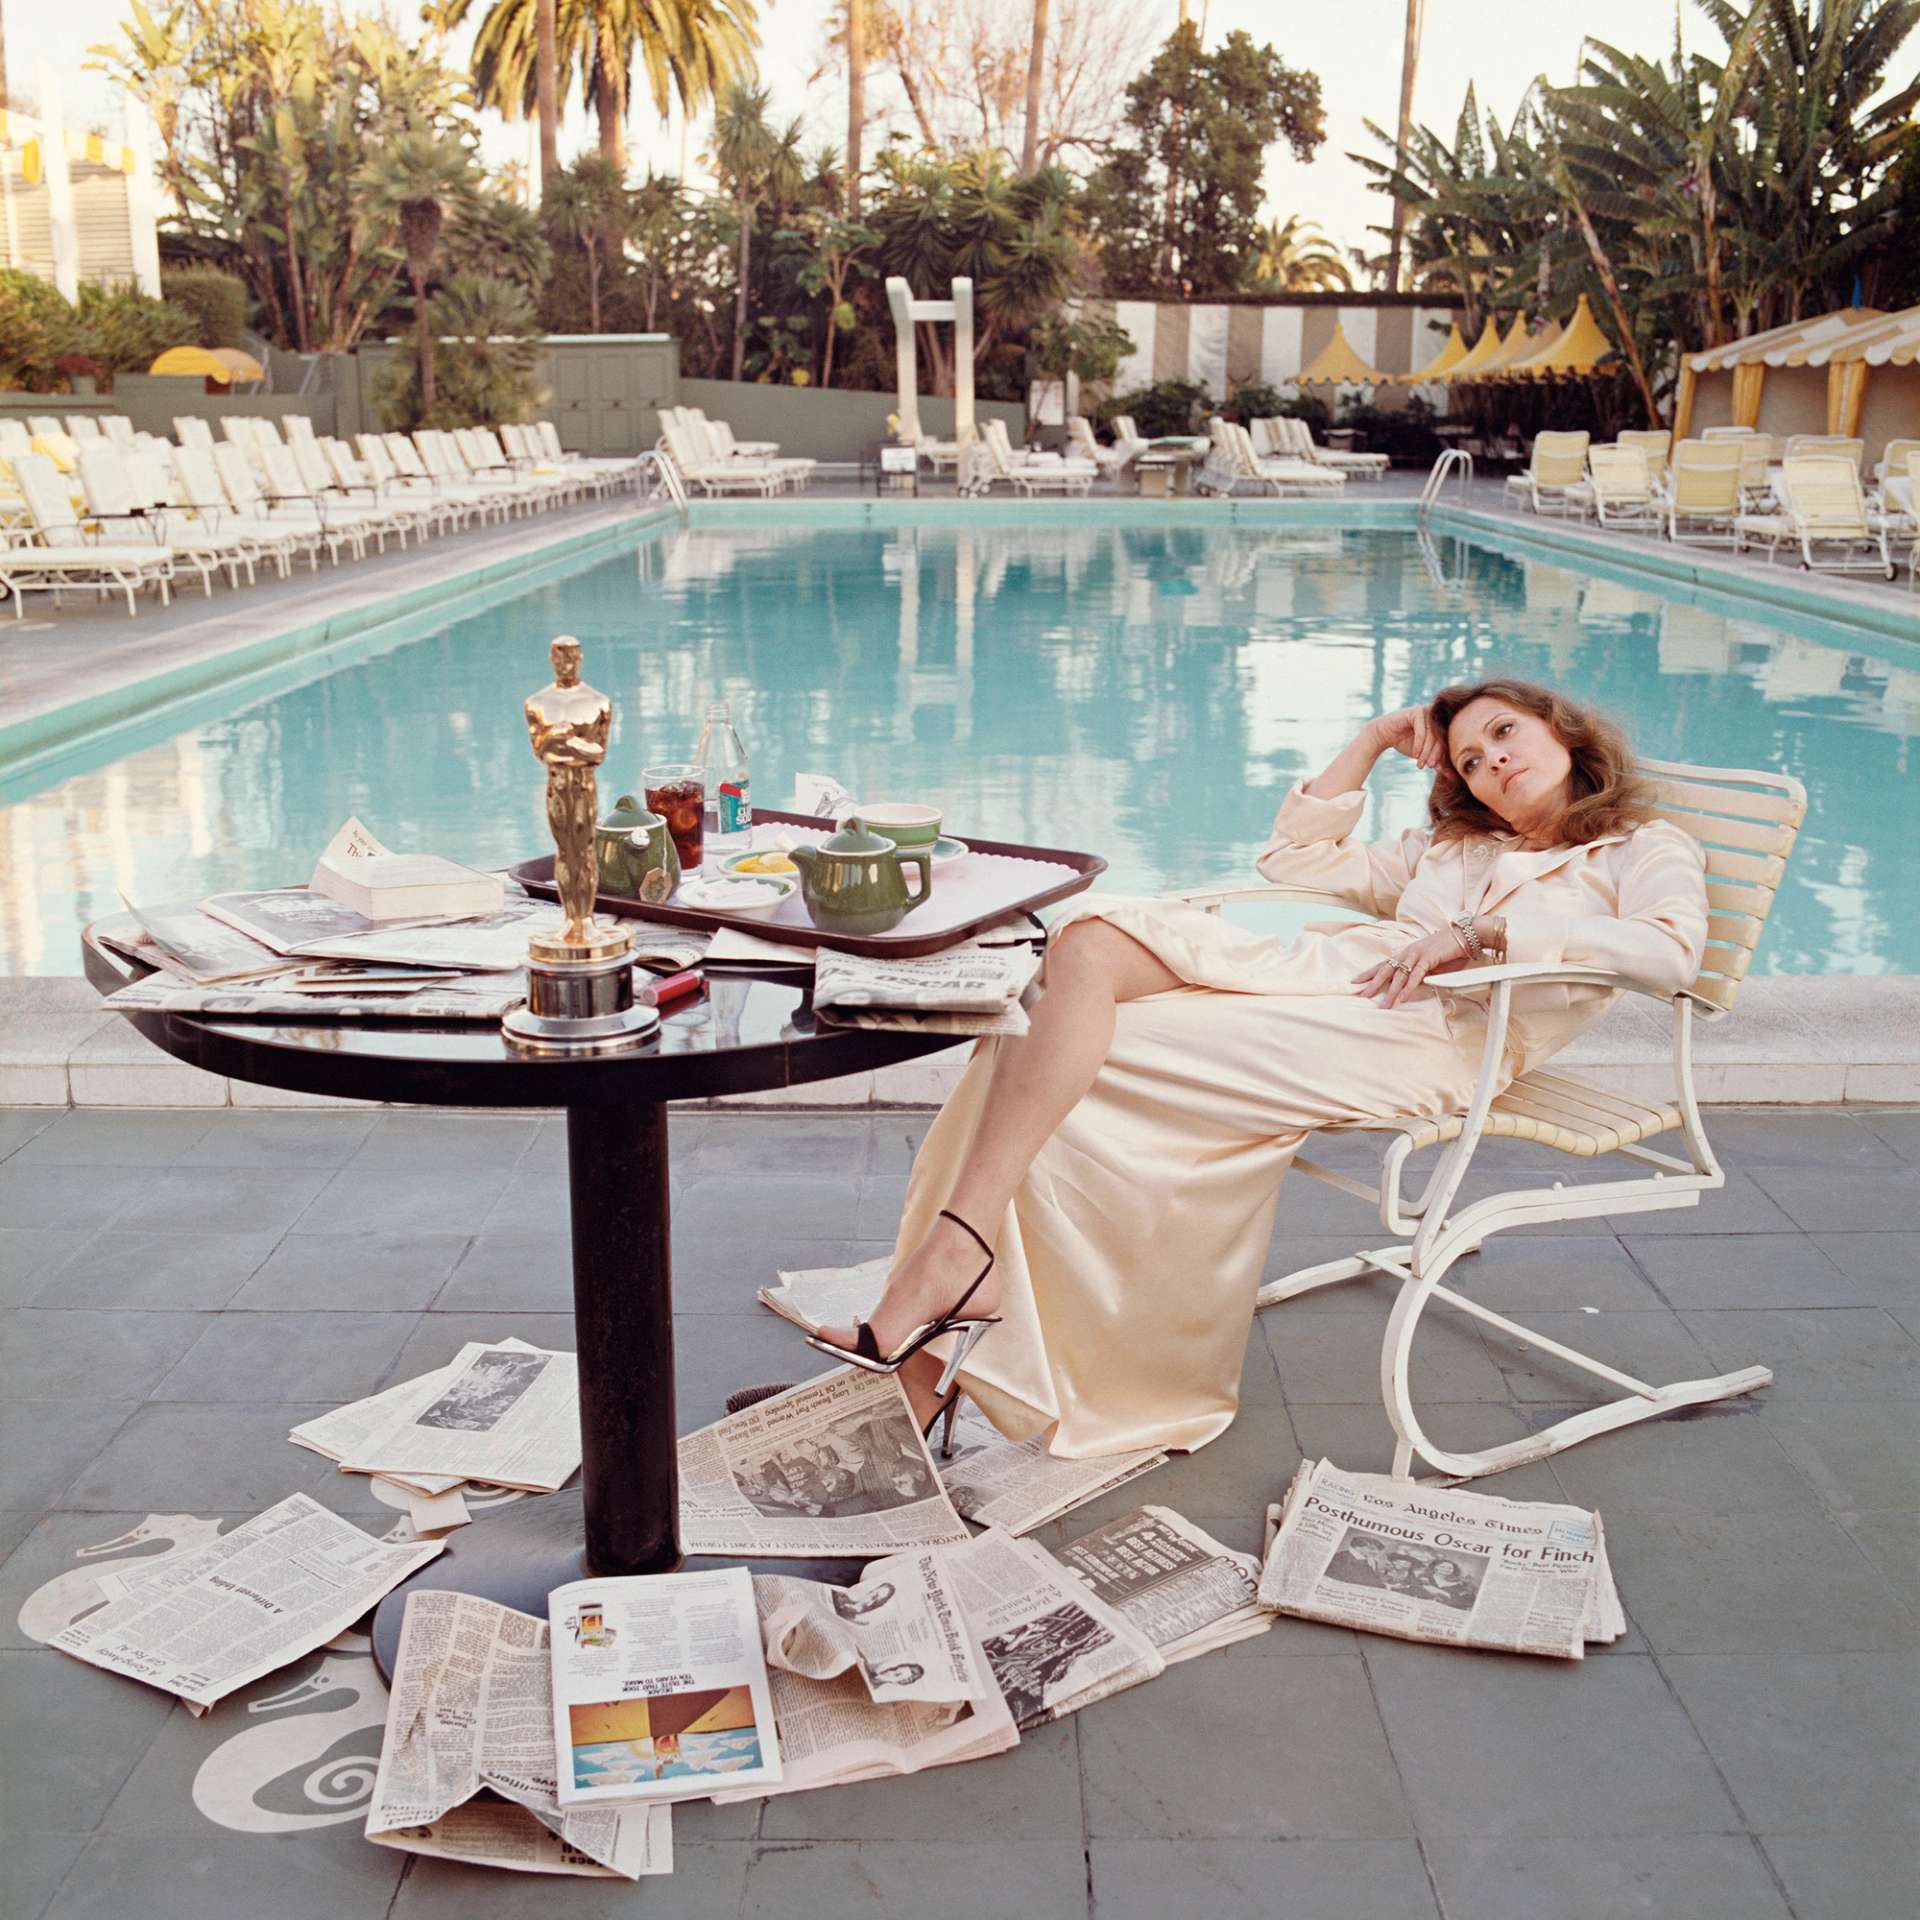 A colour photograph by Terry O'Neill depicting Faye Dunaway in a cream silk gown, lounging on a chair with a swimming pool in the background. On the table to the left of the frame is an Oscar award, a tray with a pot of tea, and newspapers which also litter the ground about her.